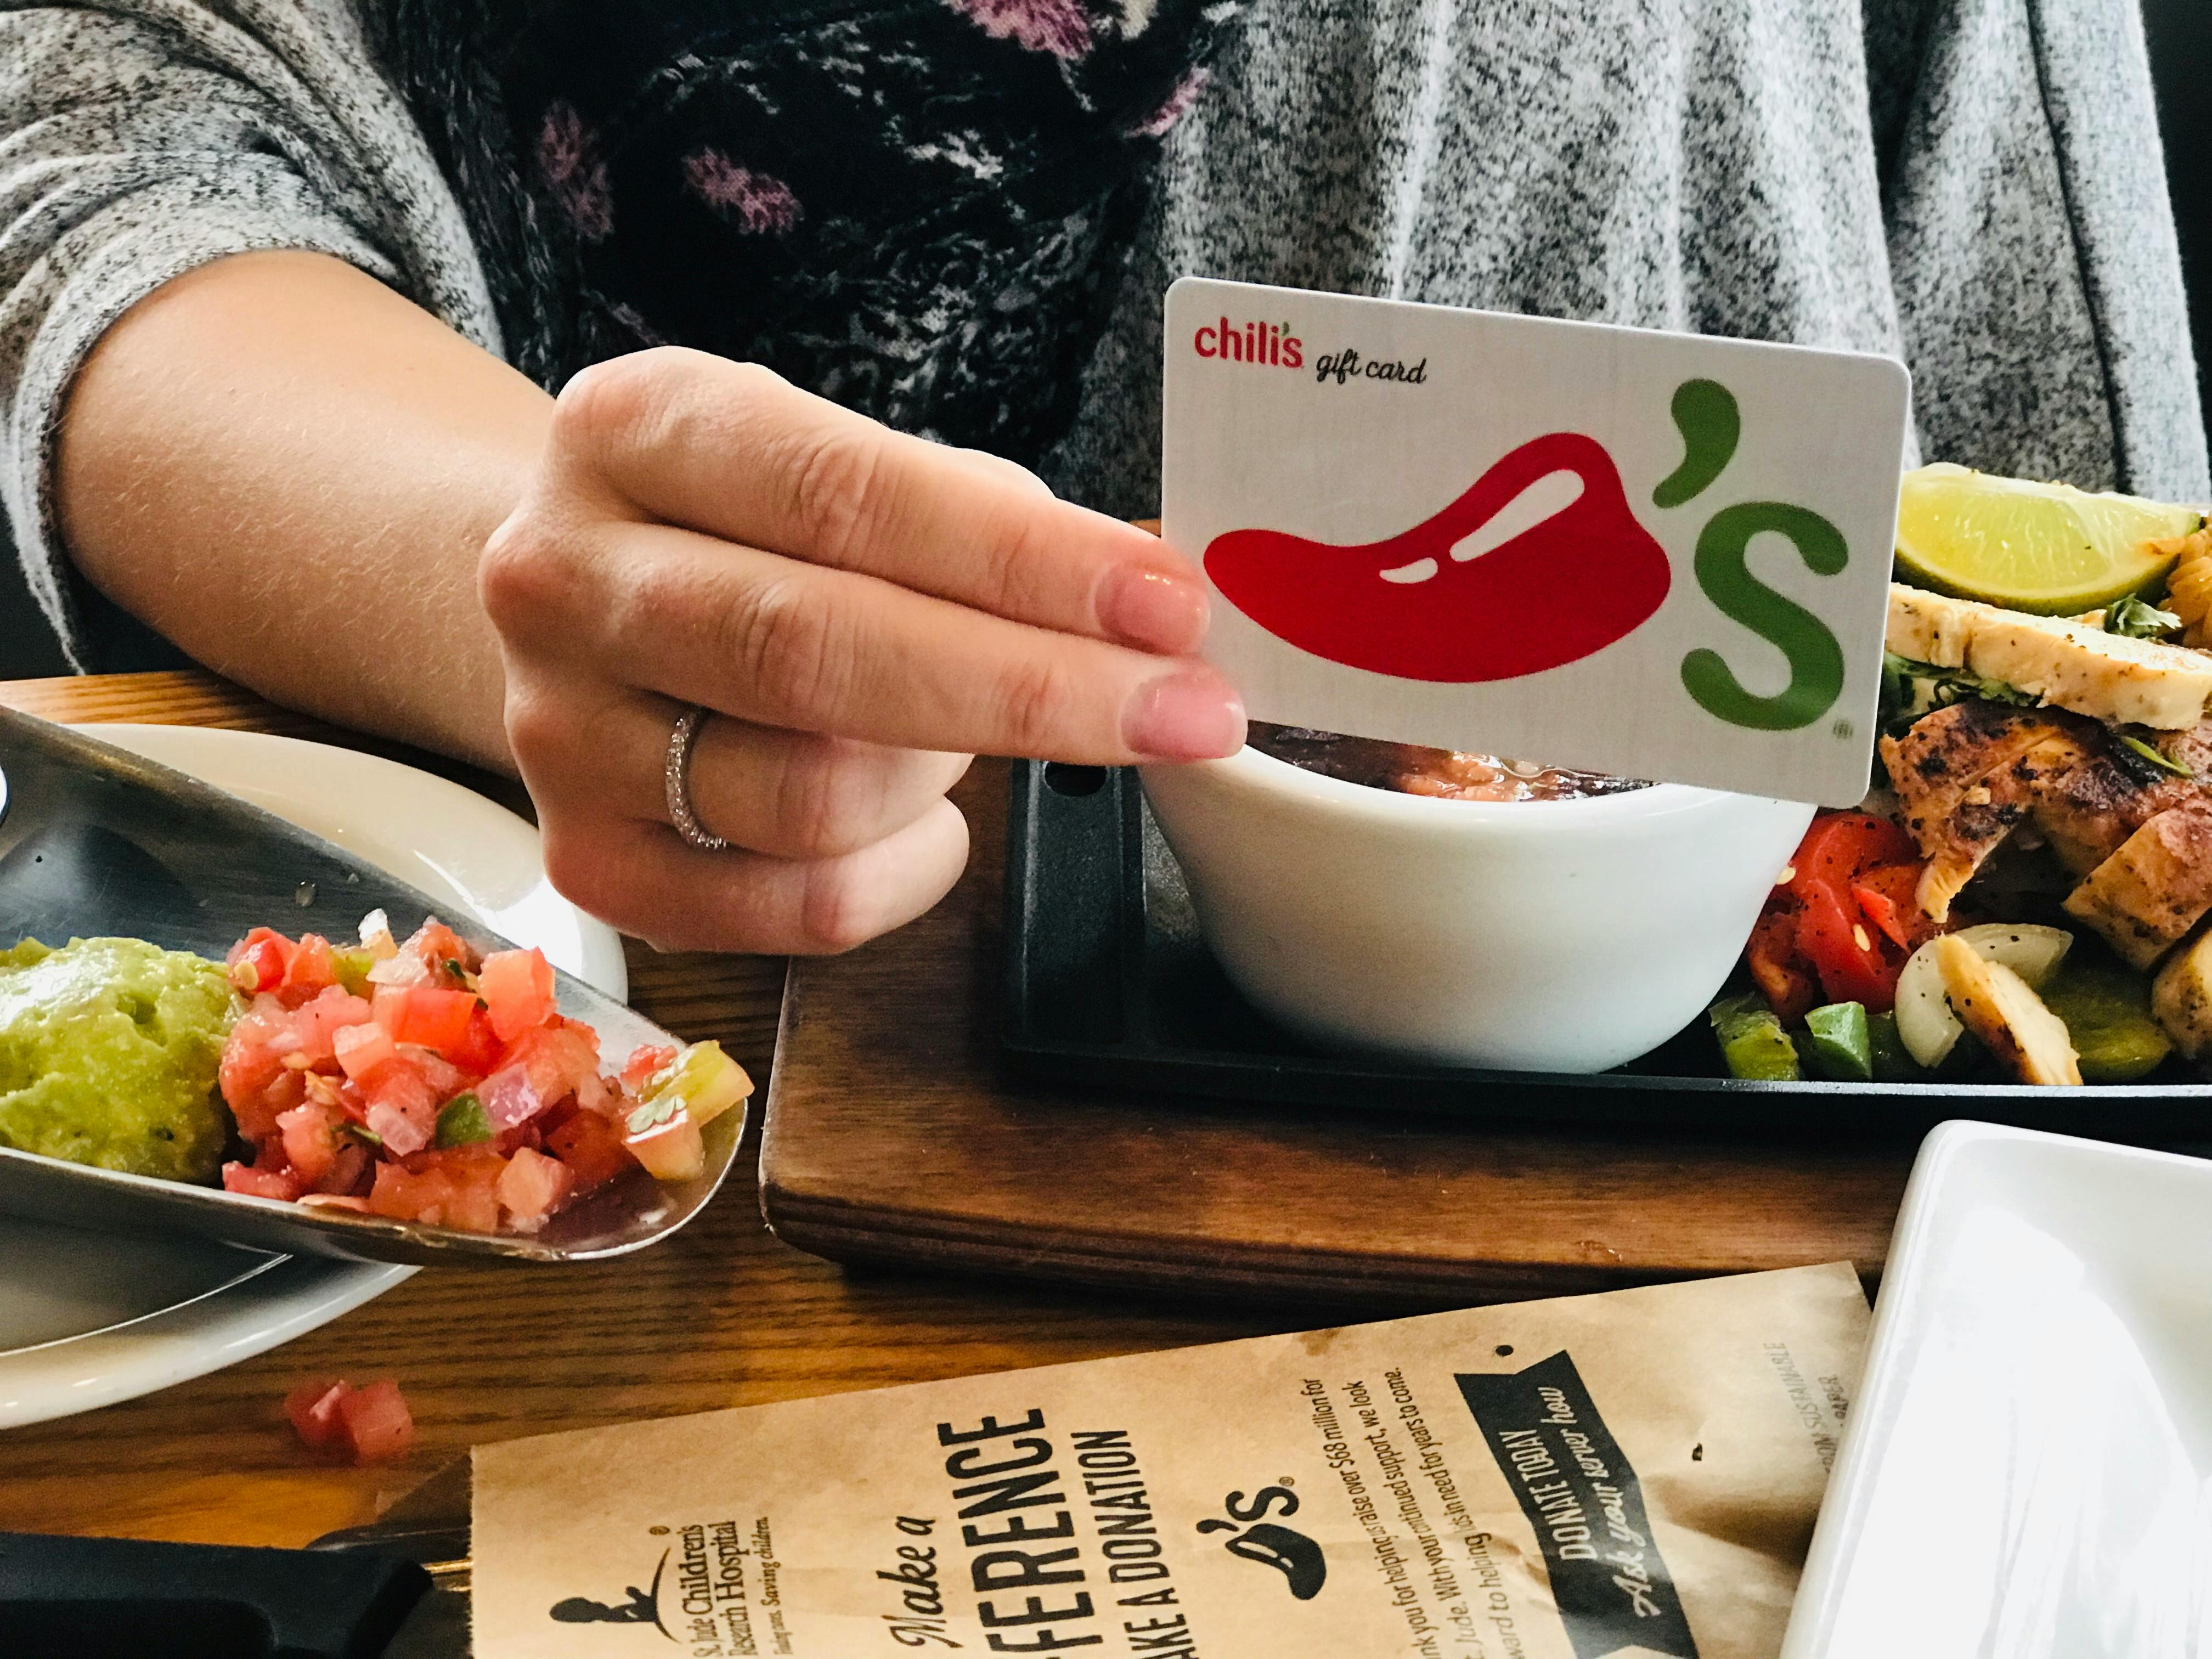 A person holding a Chilis gift card while sitting at a table with food and a menu on the table.